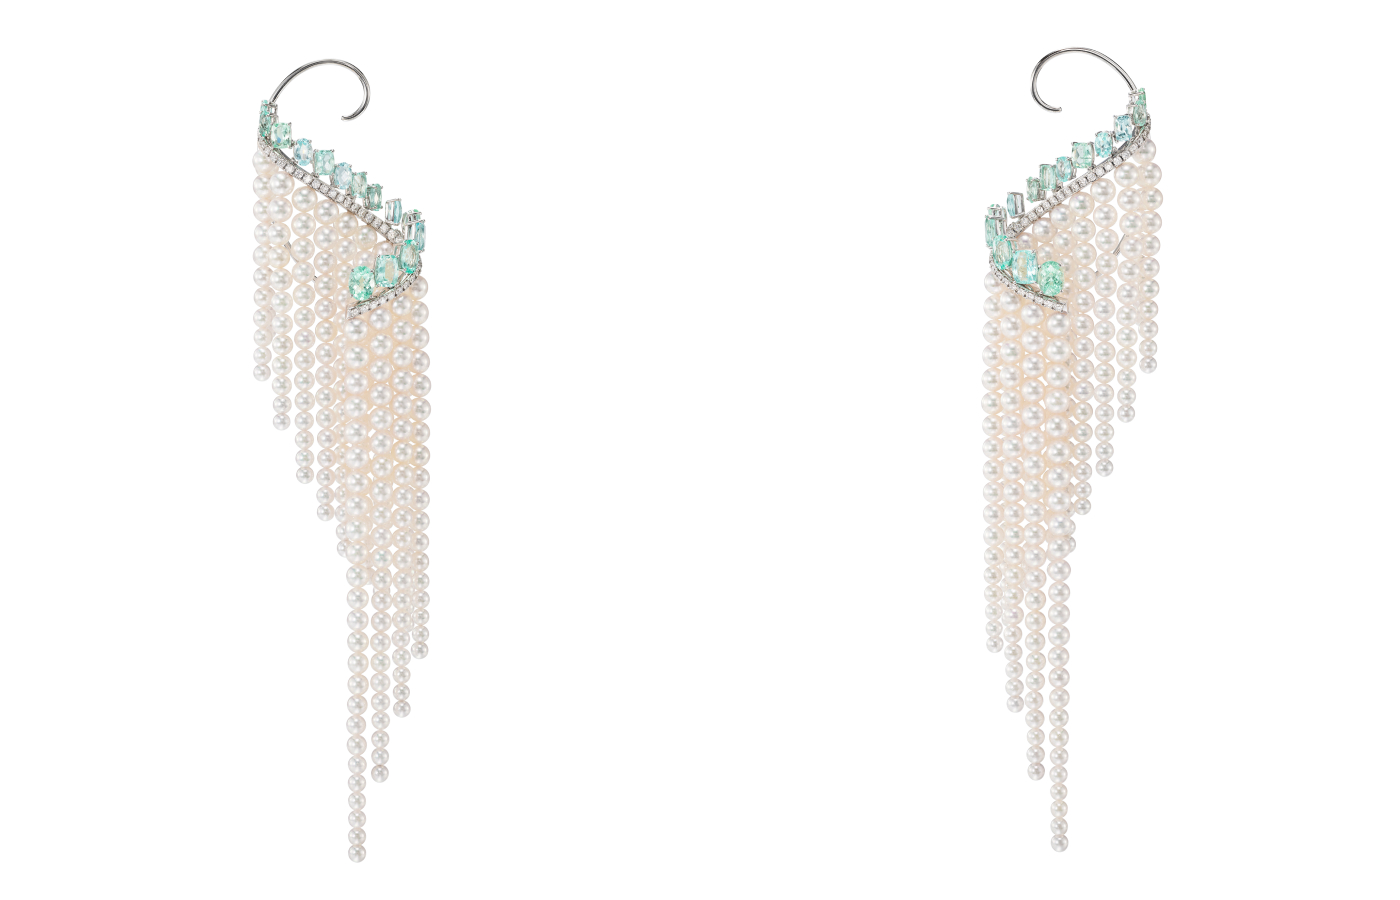 Tasaki Cascade earrings with Paraiba tourmalines, round brilliant-cut diamonds, and graduating lines of Akoya pearls, from the Atelier 6 Nature Spectacle High Jewellery collection